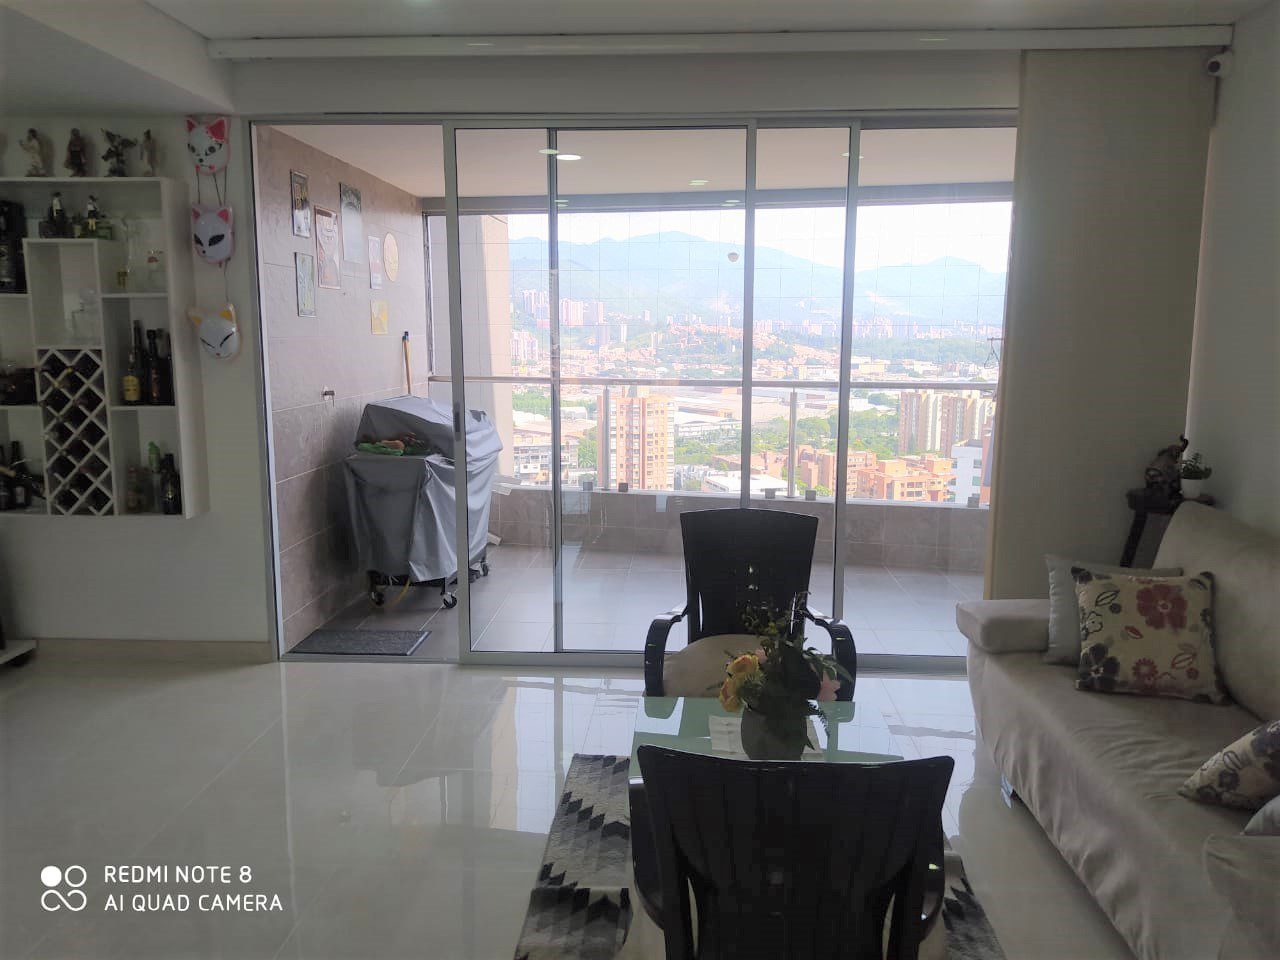 Newer, 19th Floor El Poblado Four BR Apartment Just Off the Golden Mile With One Unit Per Floor